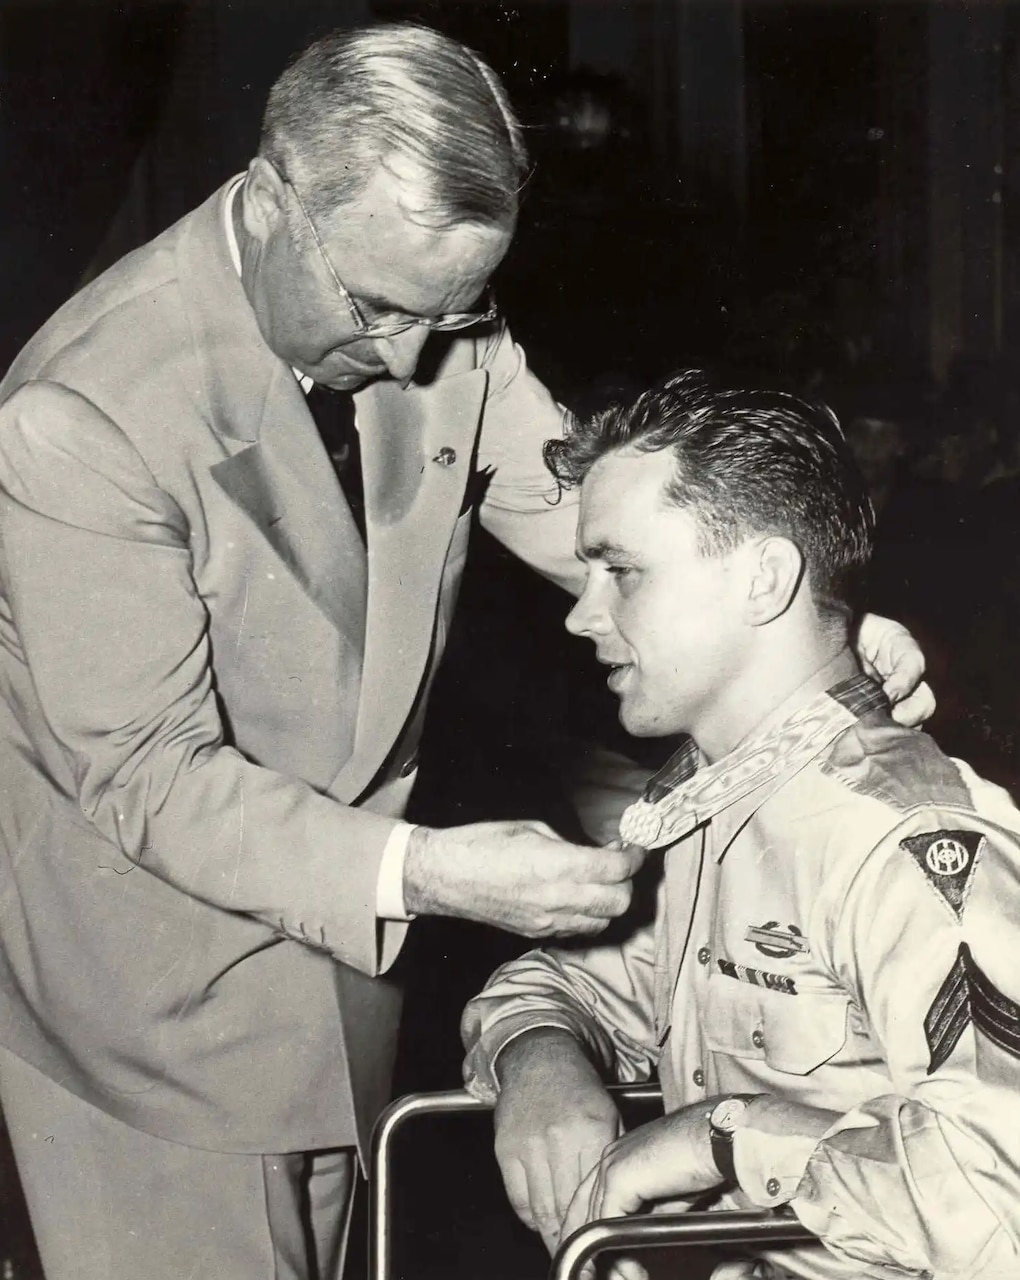 A man puts a medal around the neck of seated man.